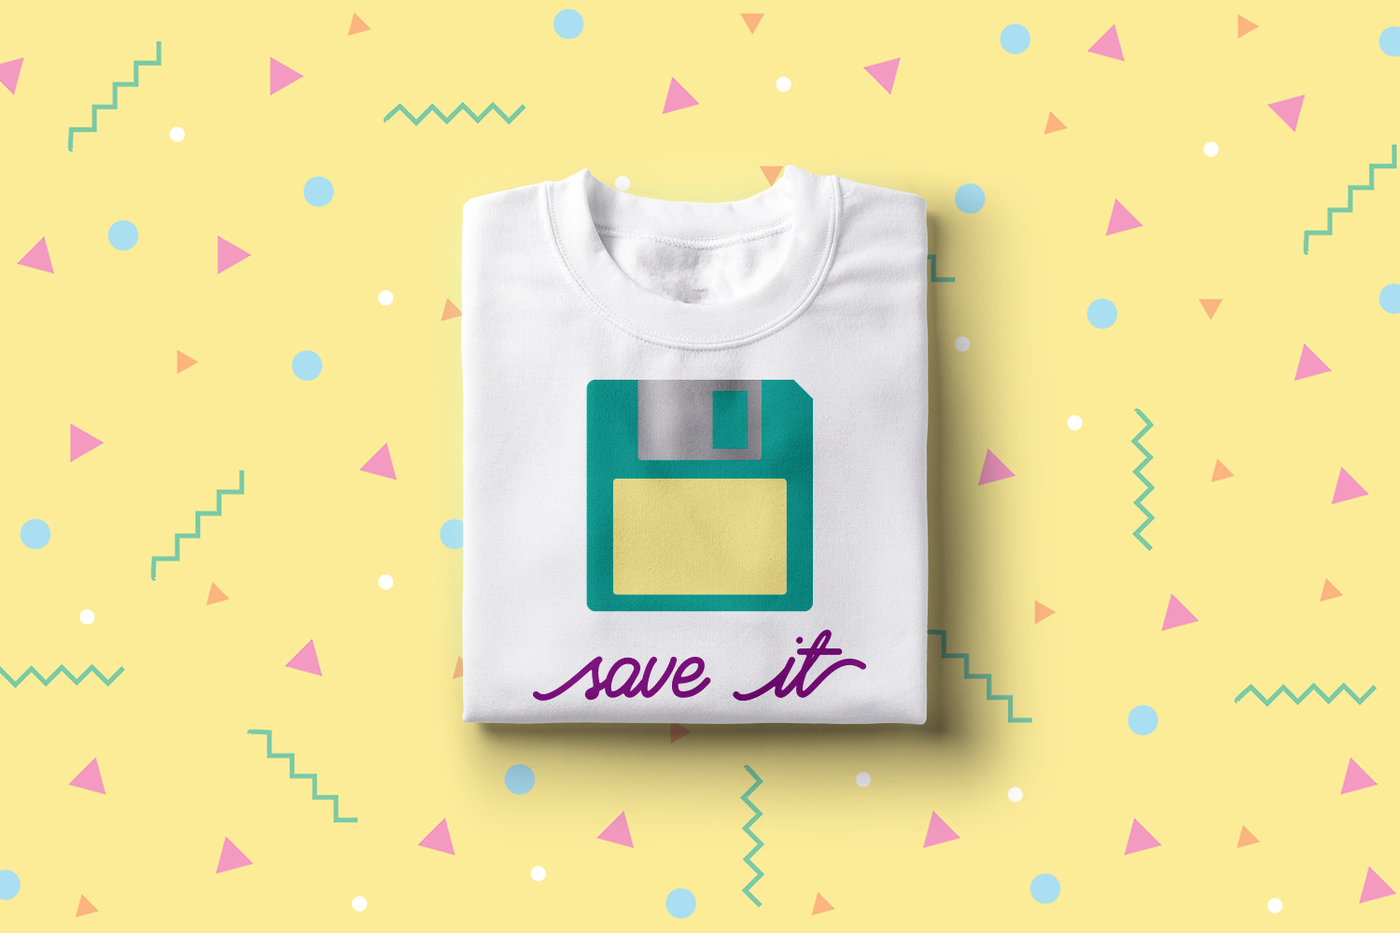 Floppy disk design with the words "save it"